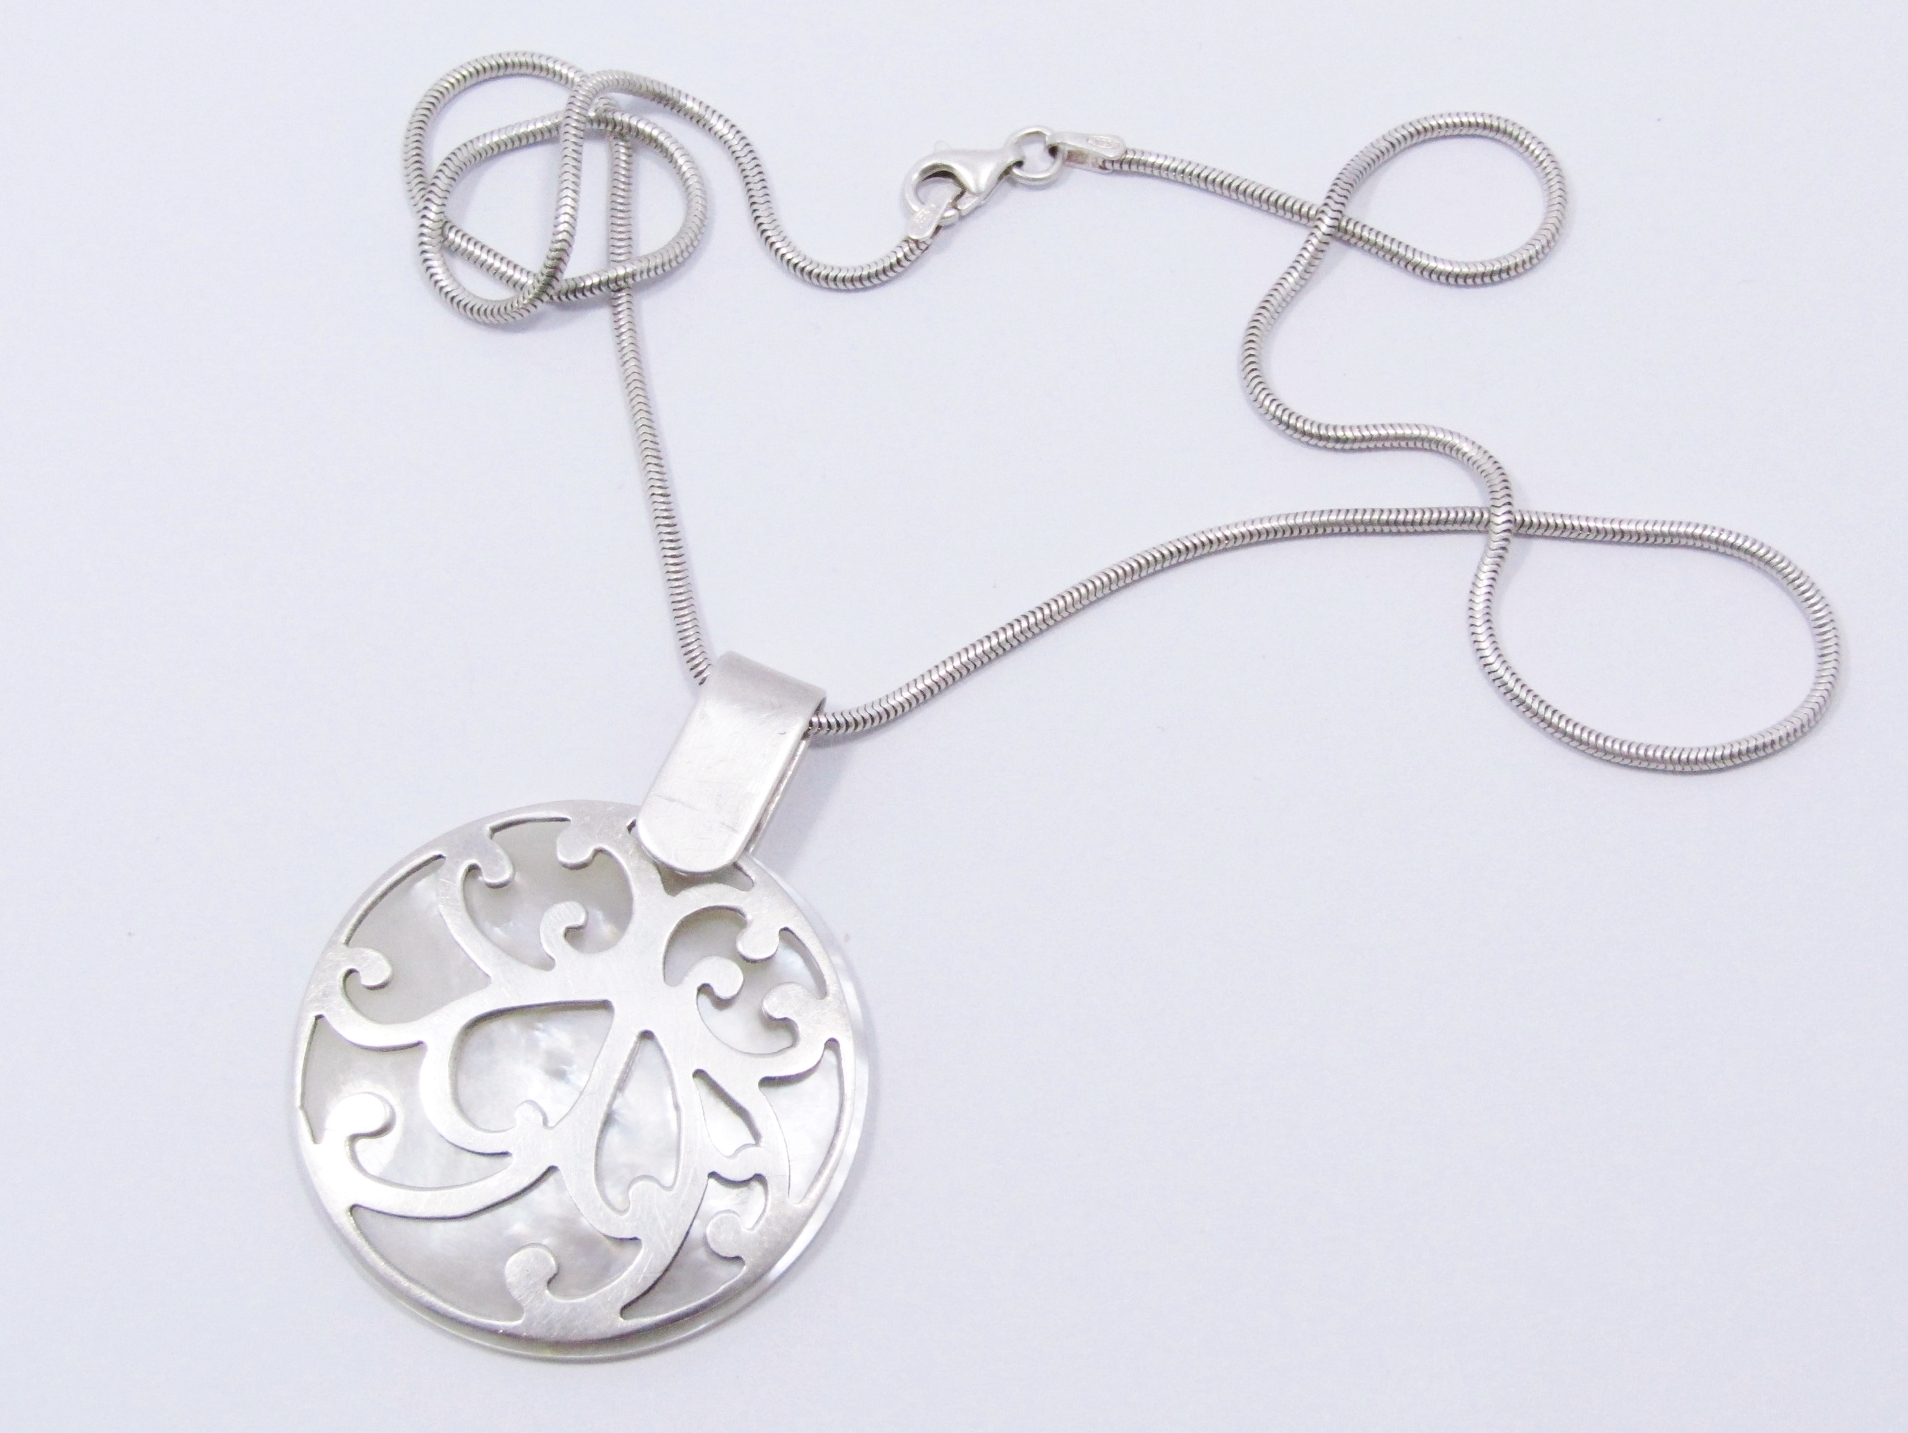 A Stunning Large Mother of Pearl Pendant On Chain in Sterling Silver.